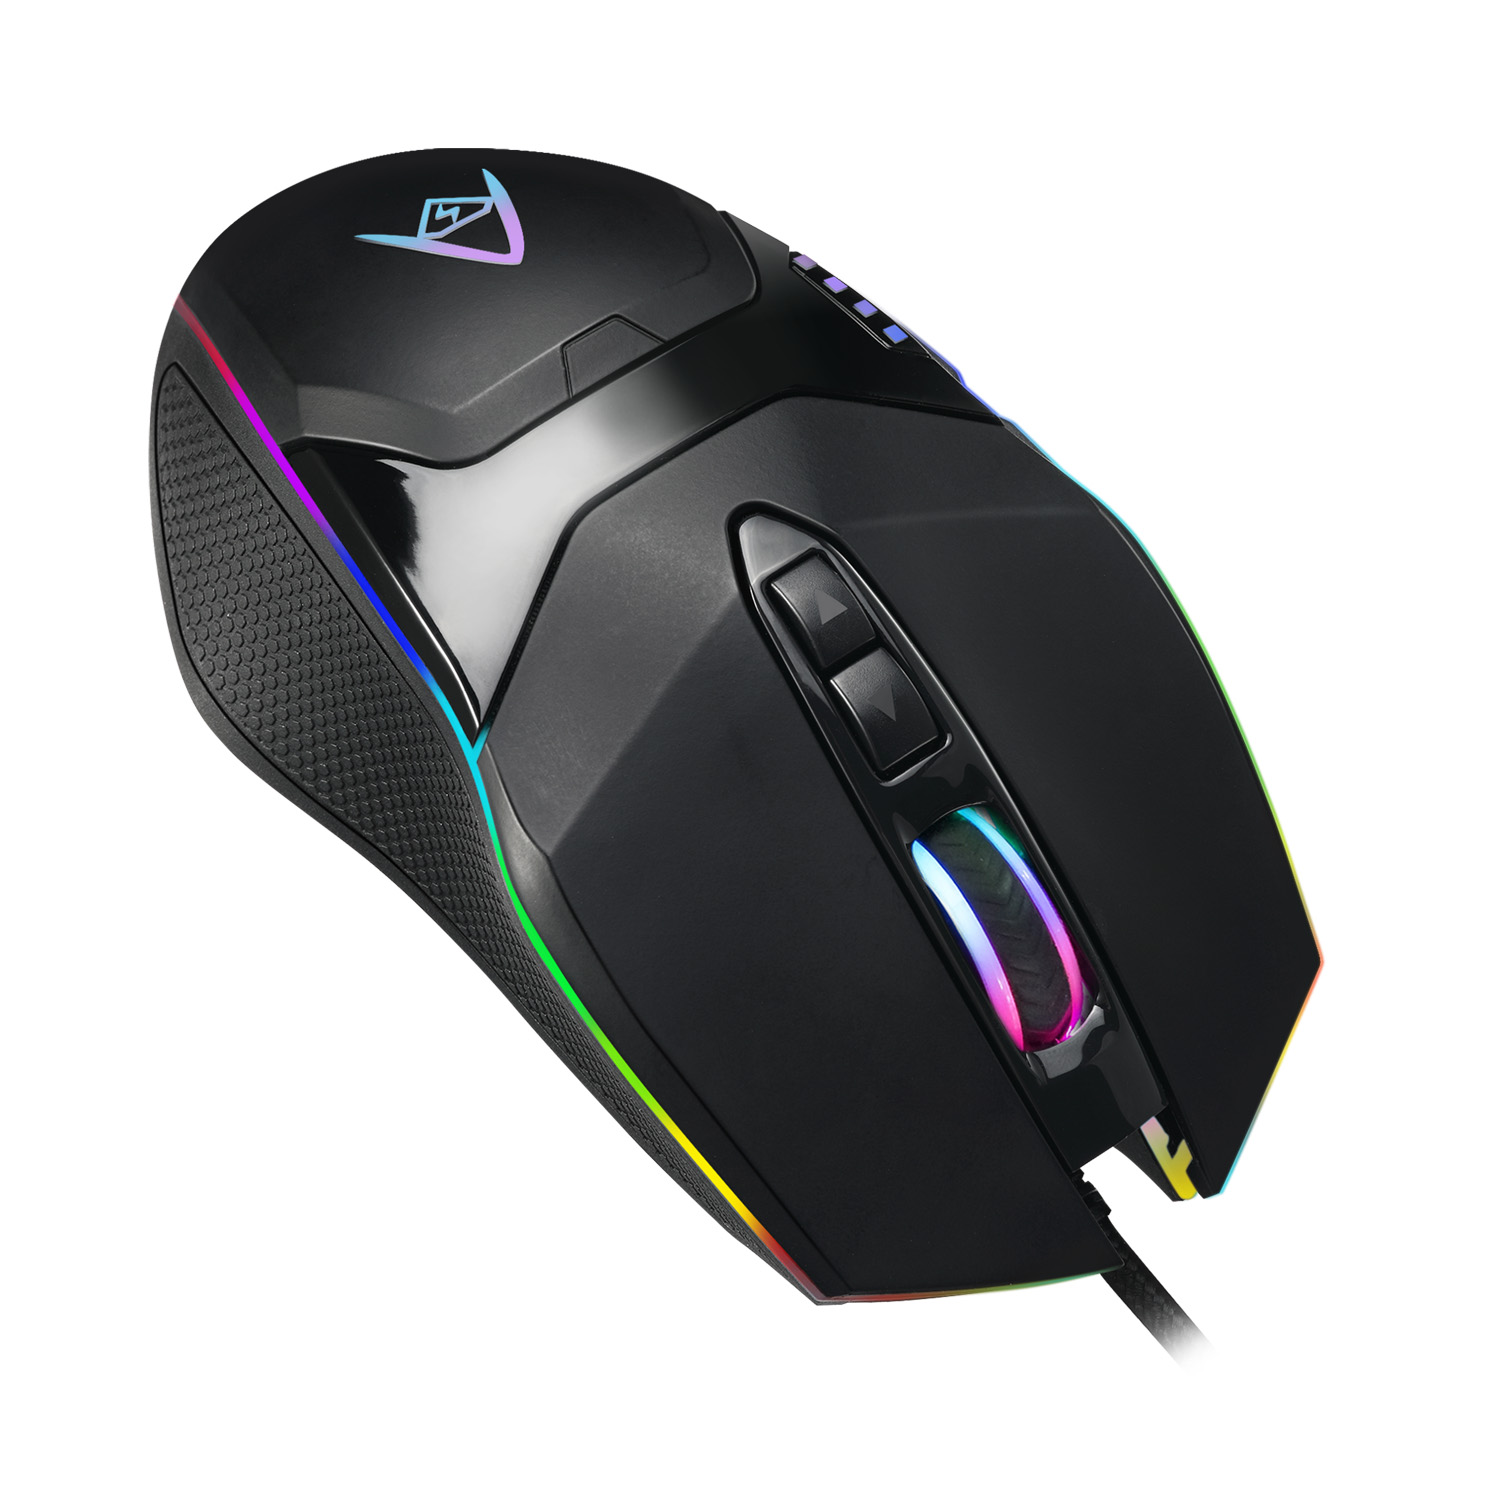 Illuminated 7-Button Ambidextrous Gaming Mouse - Adesso Inc 